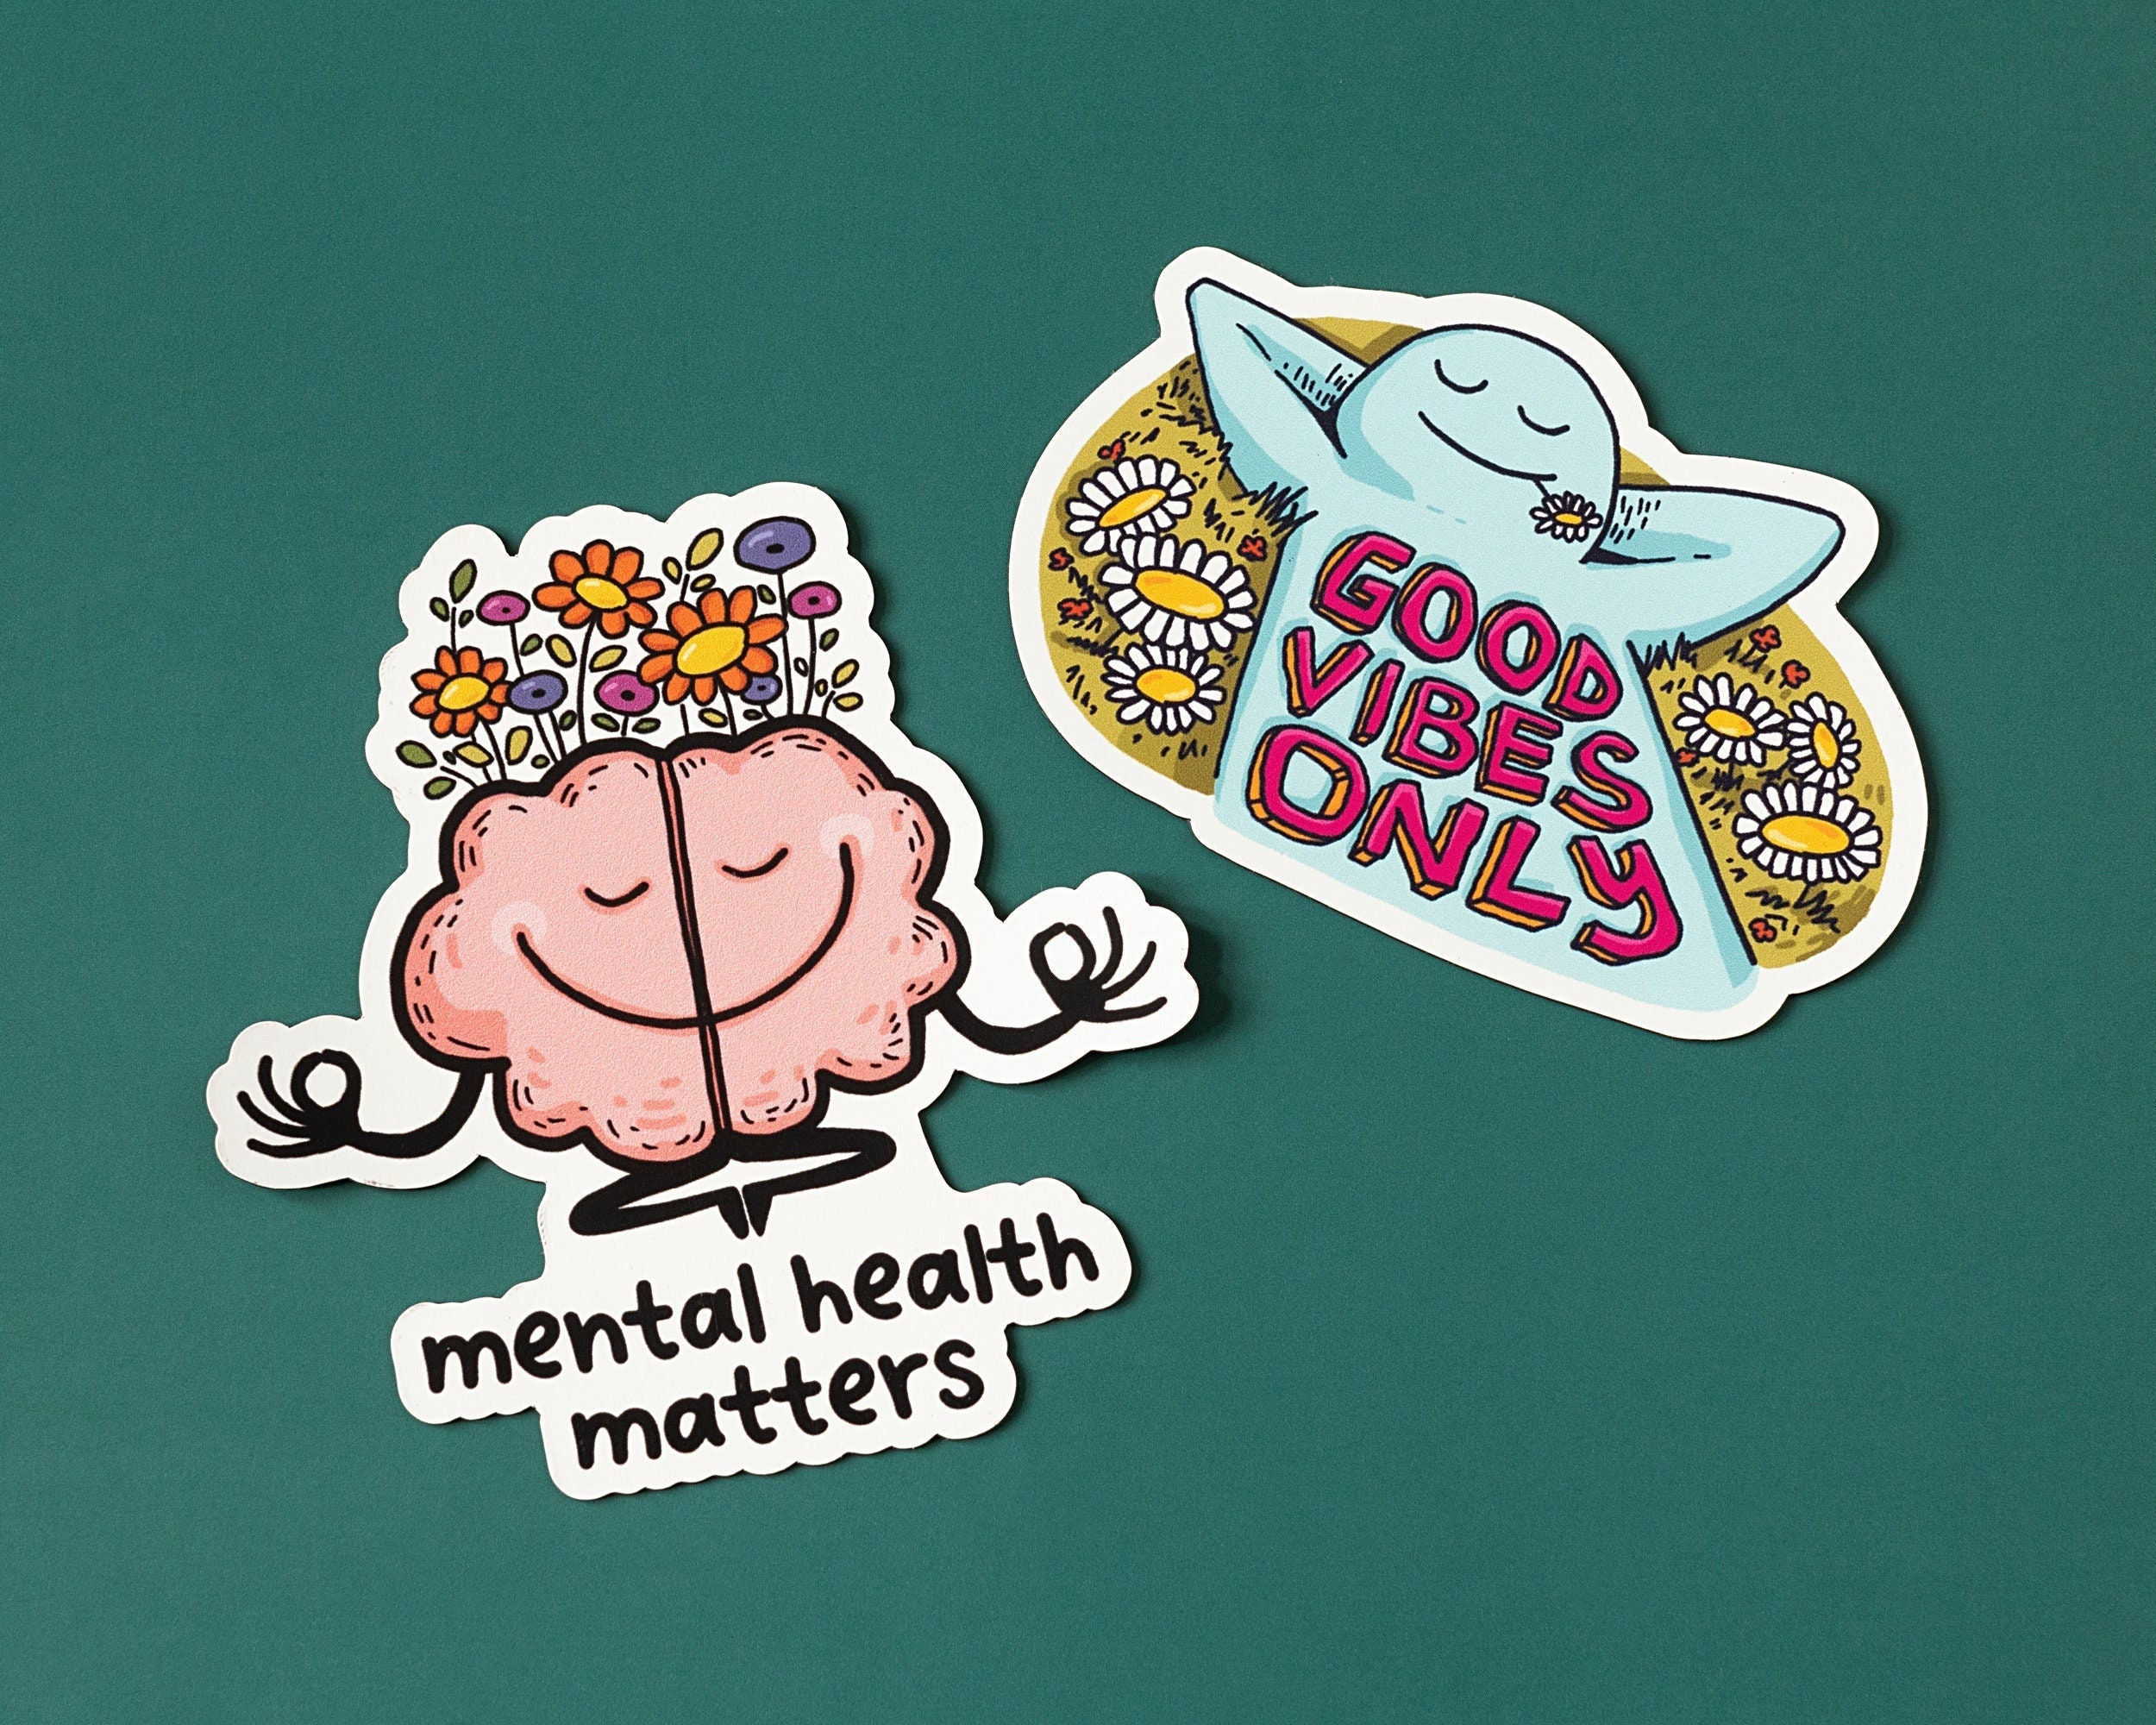 Motivational Stickers, Positive Stickers, Laptop Stickers, Water Bottle  Stickers, Kindle Stickers, Pack of 7 Vinyl Stickers, Encouraging 